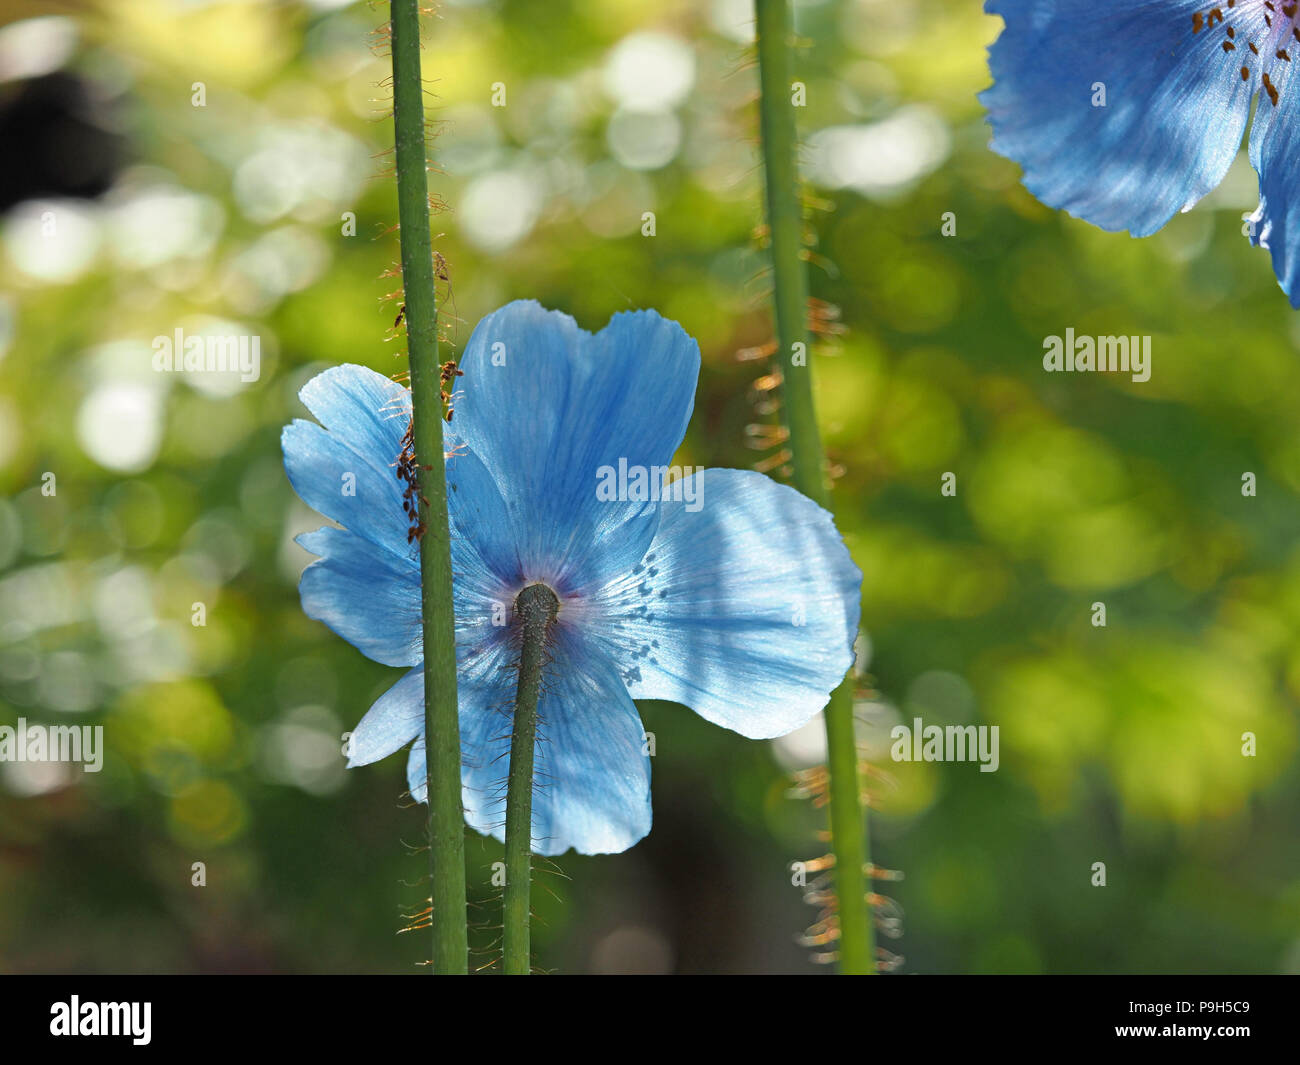 stunningly beautiful backlit translucent blue petals and golden stamens of flowers of Himalayan Blue poppy growing in garden in Cumbria, England ,UK Stock Photo